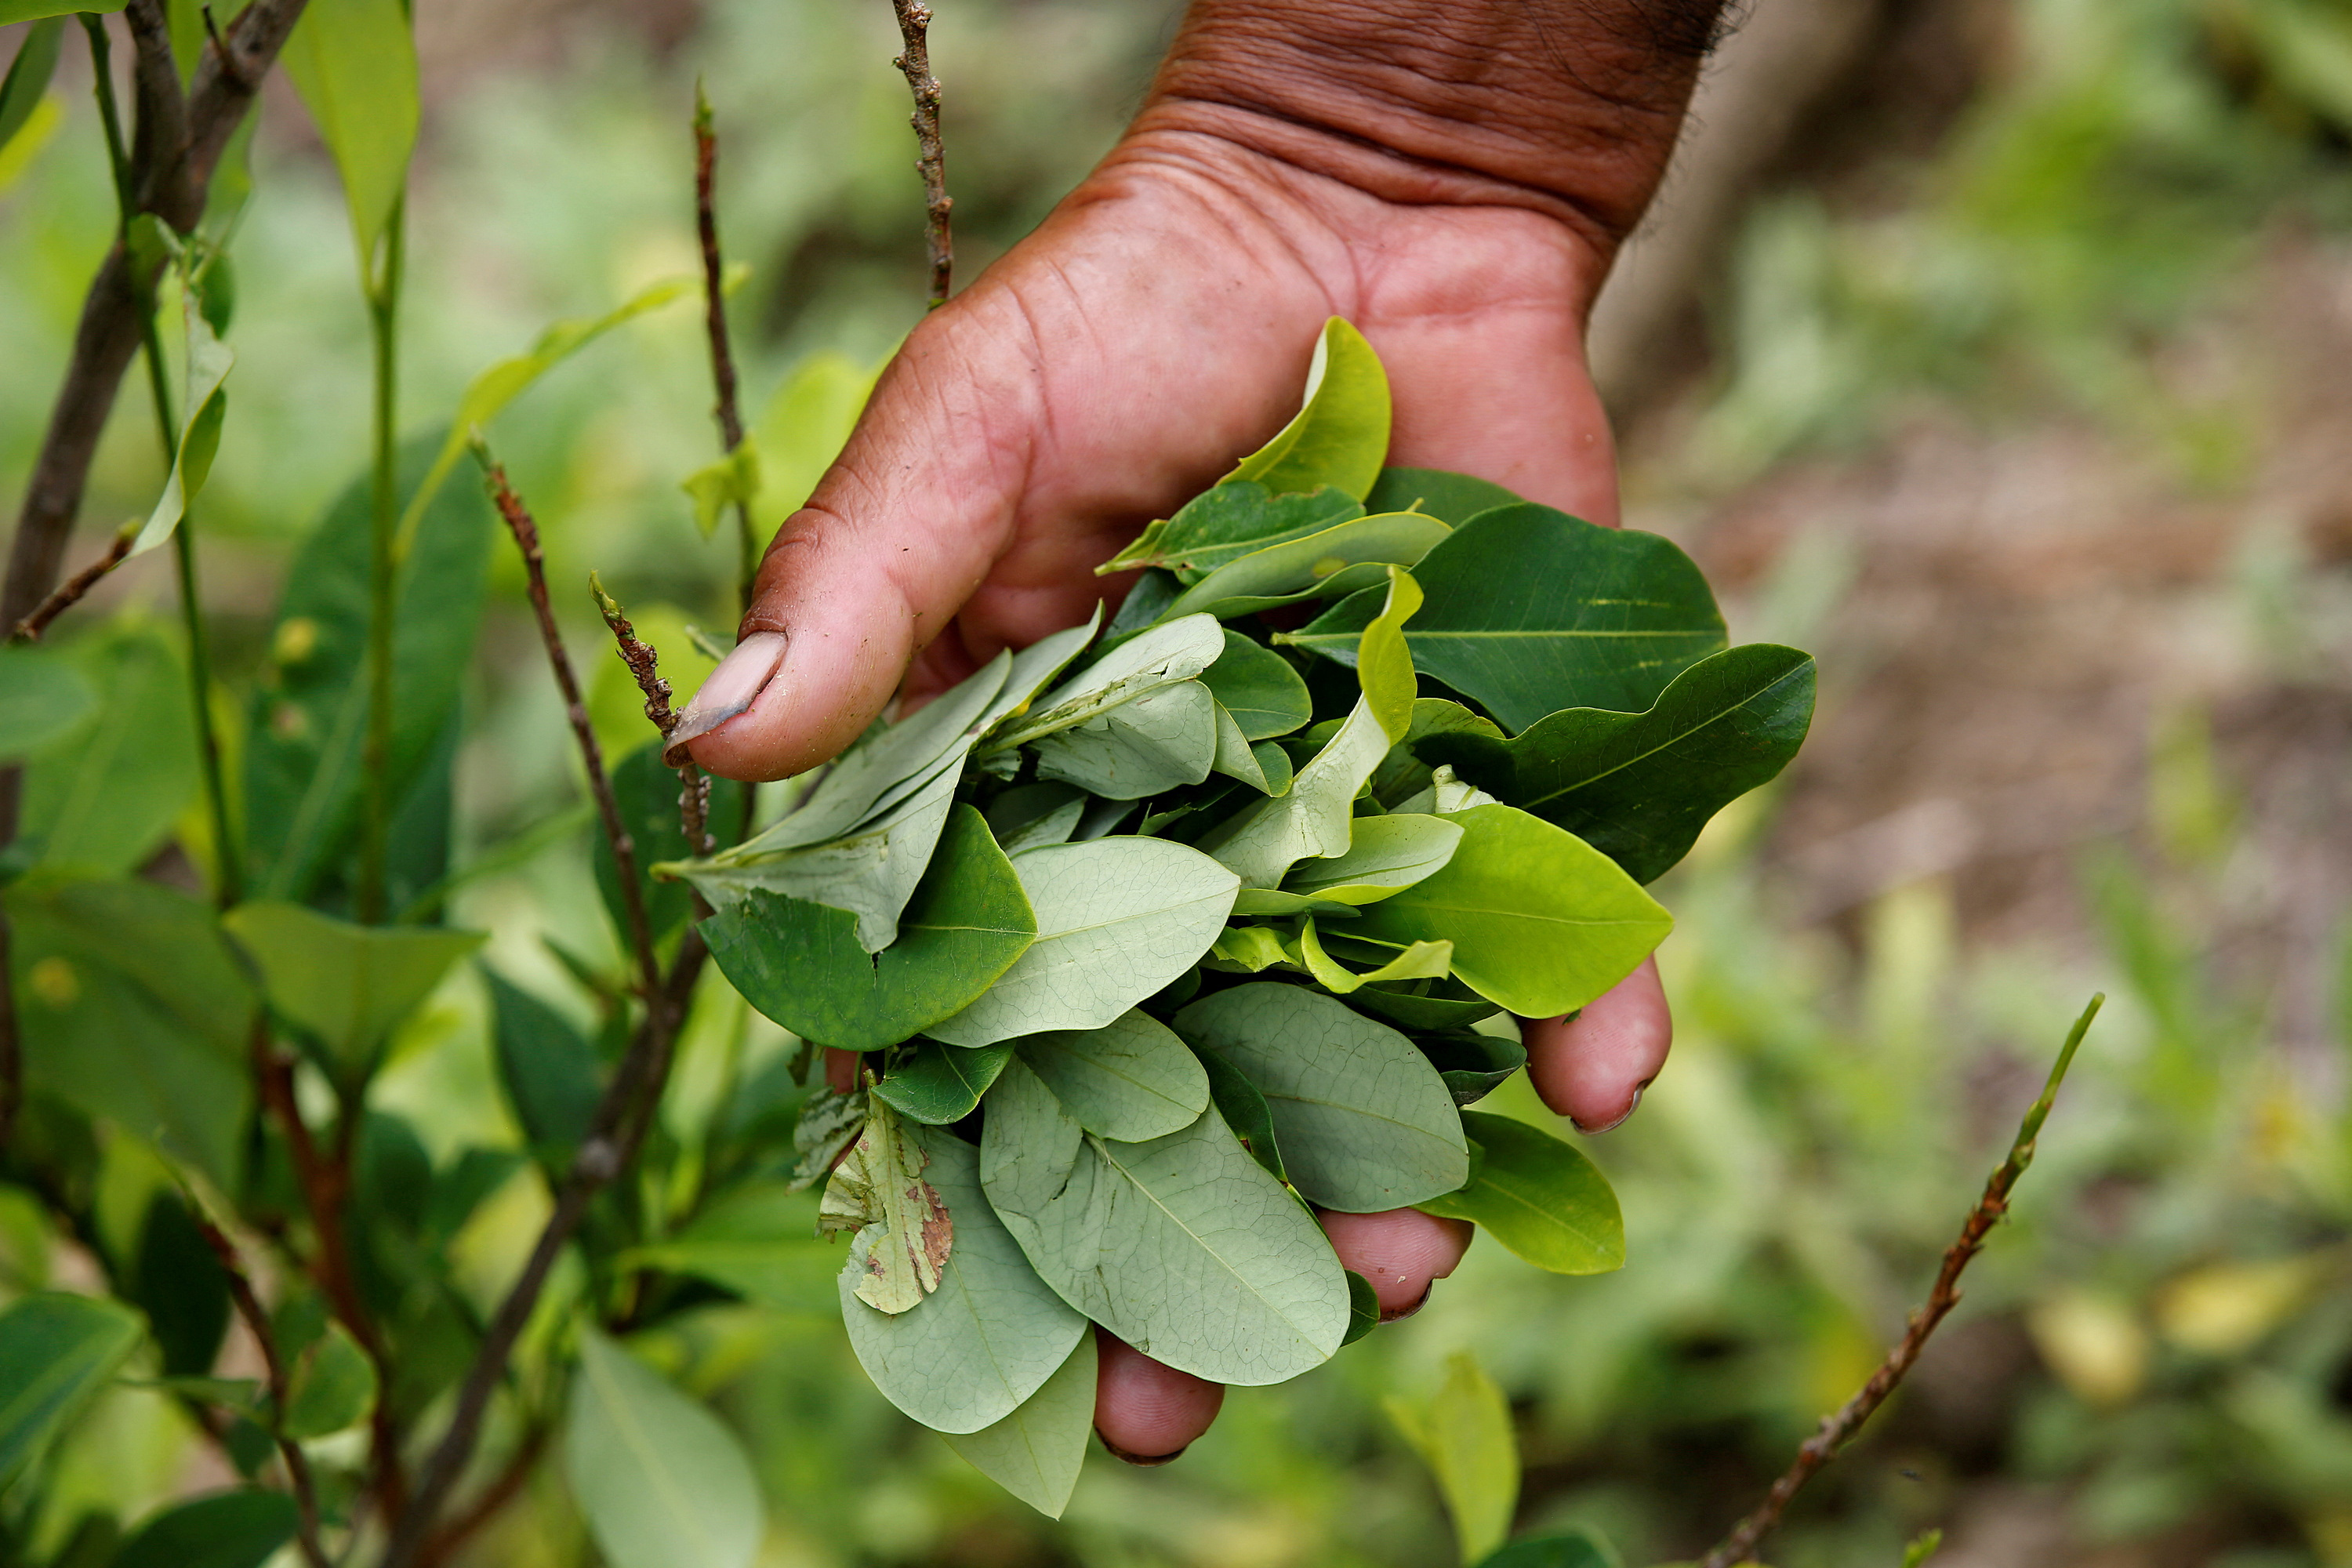 FILE PHOTO: A peasant holds up coca leaves collected from his crops in Cauca, Colombia, January 27, 2017. Picture taken January 27, 2017. REUTERS/Jaime Saldarriaga/File Photo